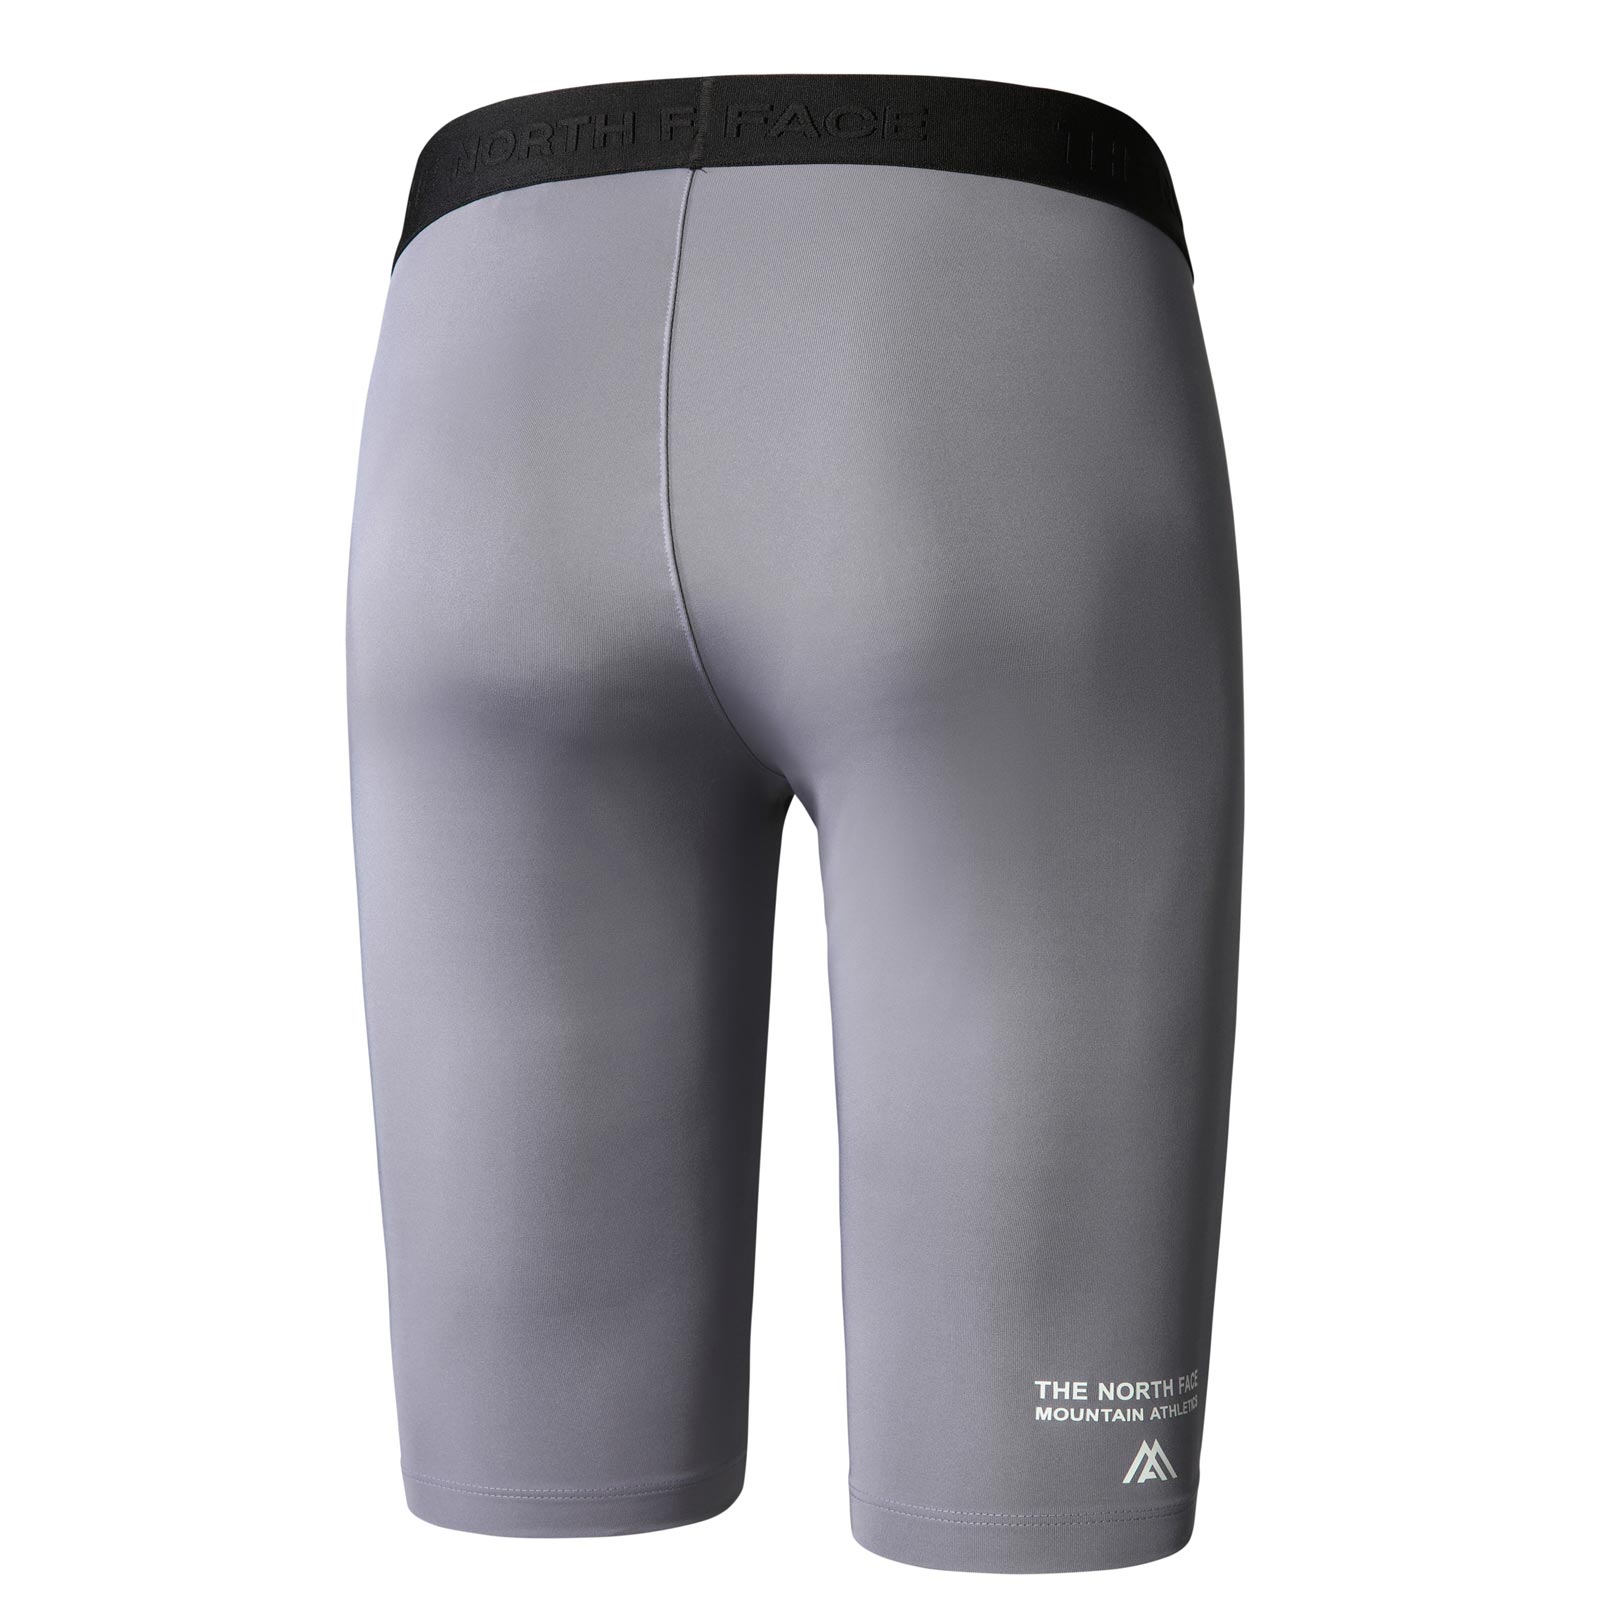 THE NORTH FACE MOUNTAIN ATHLETICS WOMENS HIGH-WAISTED SHORTS